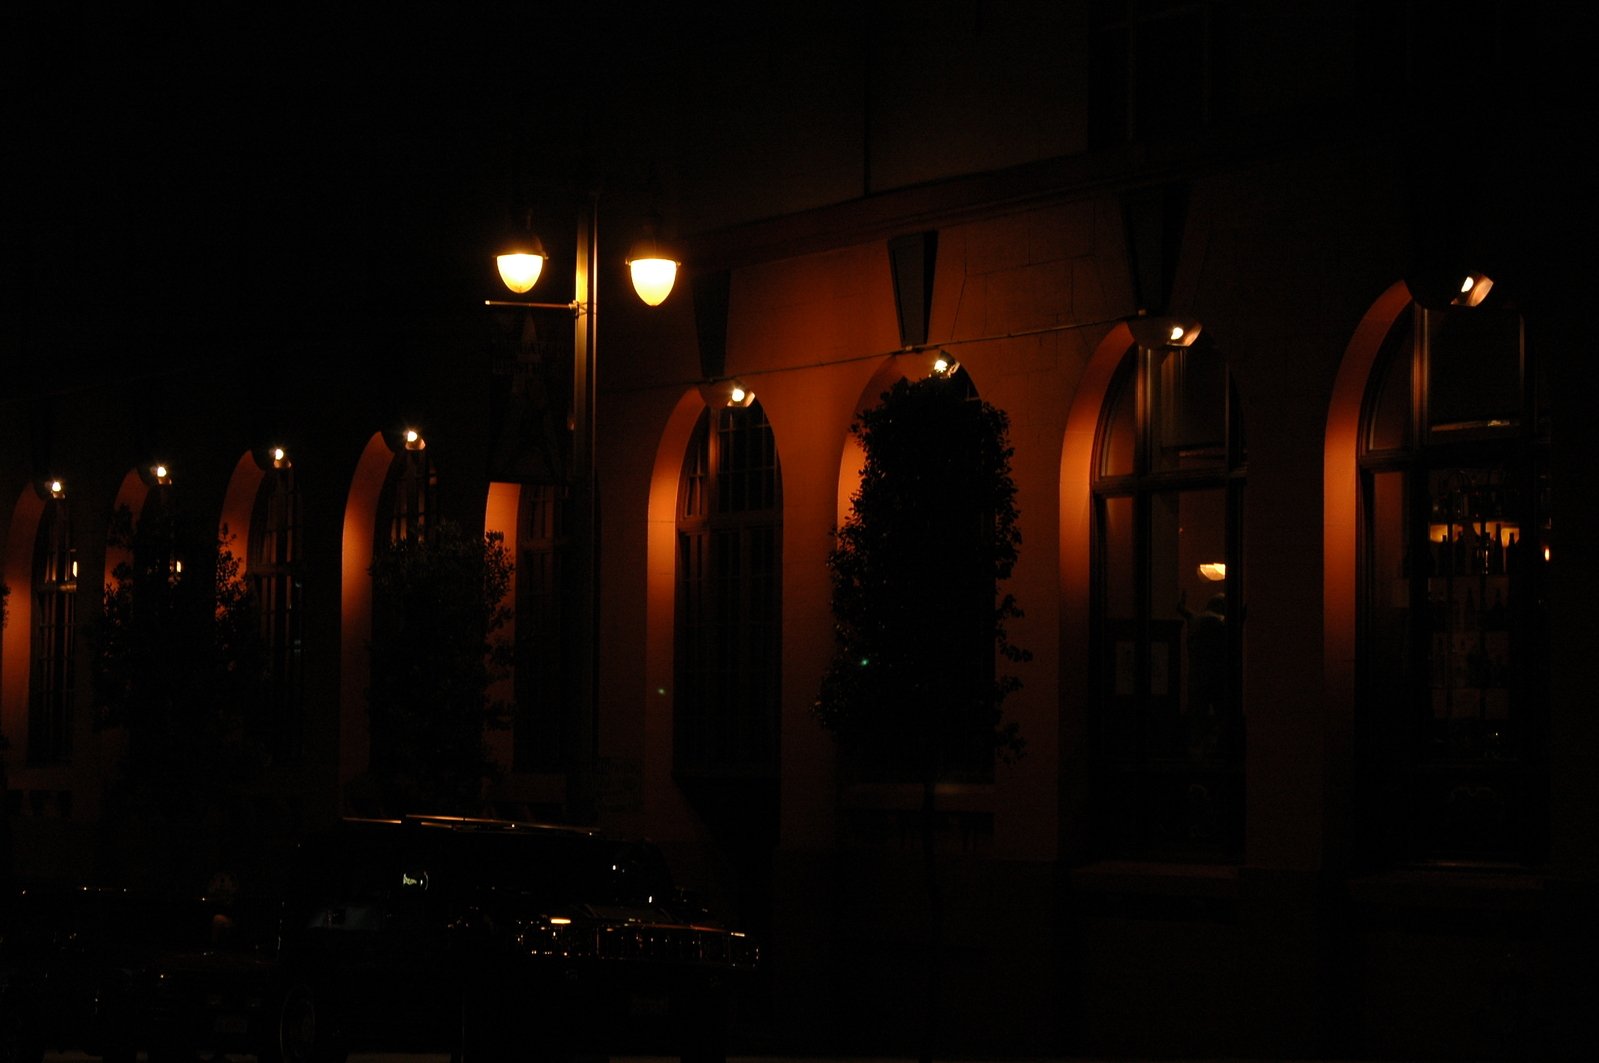 some buildings with streetlights and lighting at night